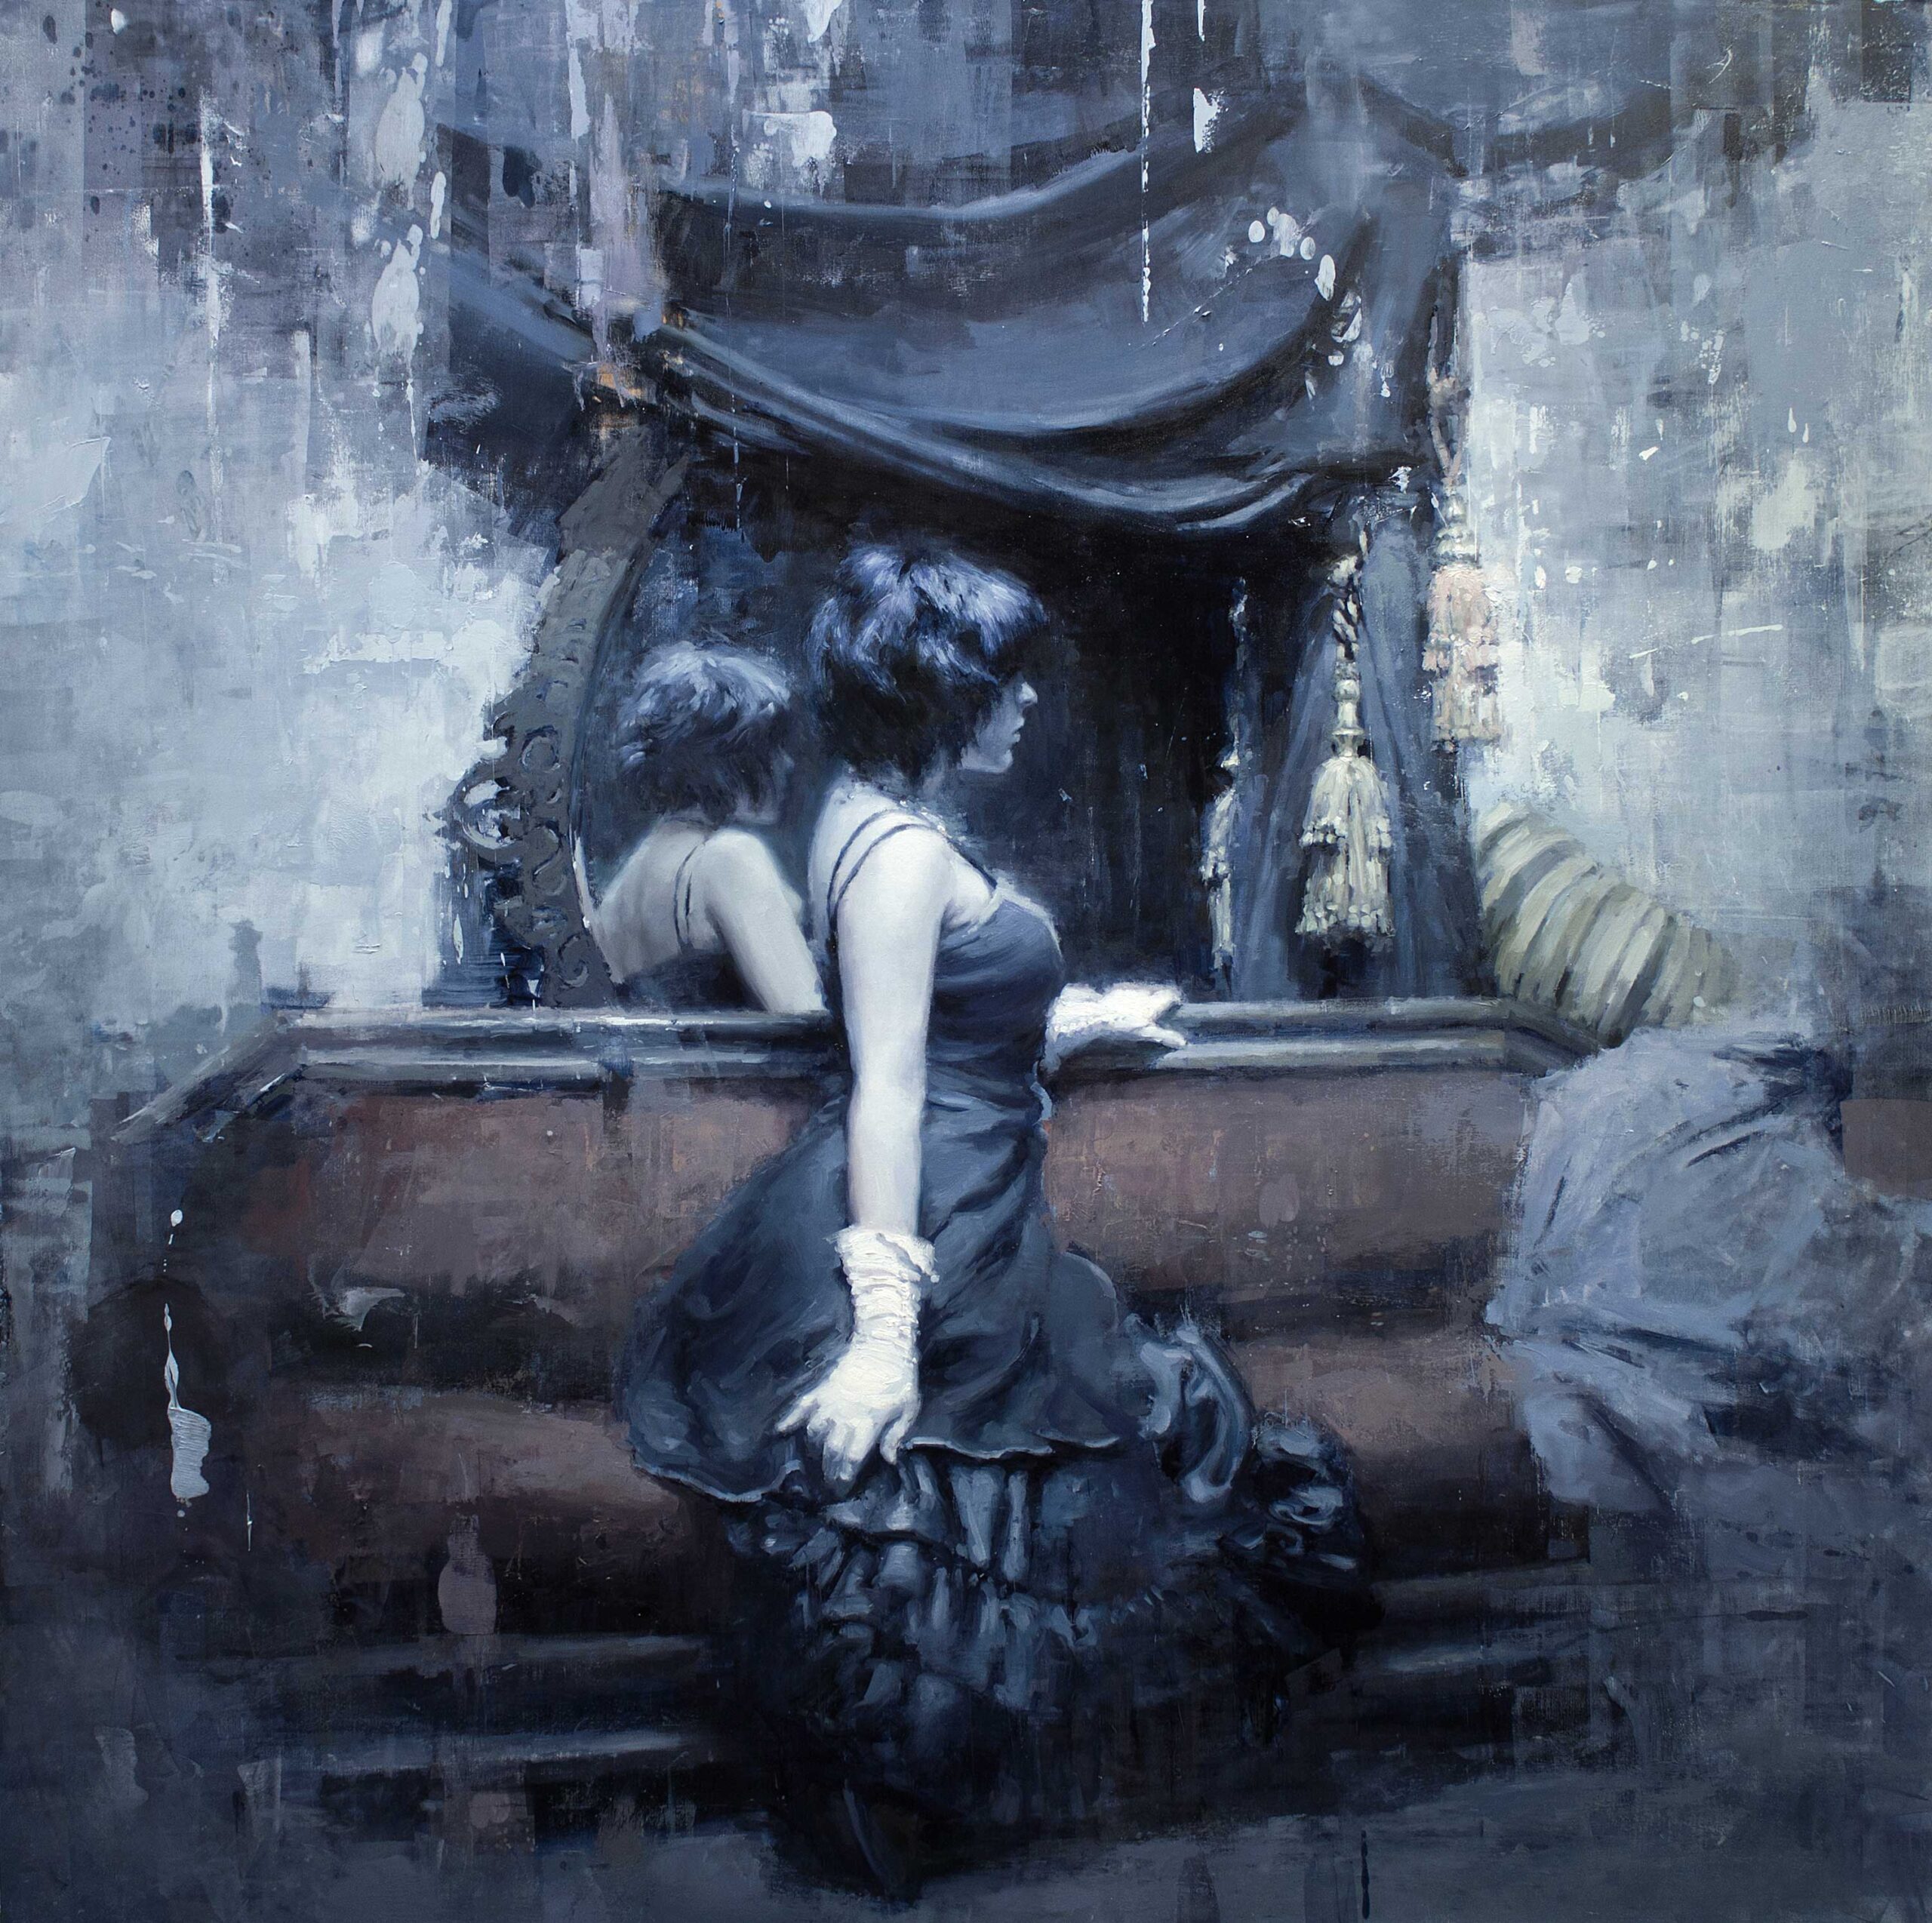 Jeremy Mann, "Lament," 48 x 48 inches, Oil on Panel, 2011, Sold through the Principle Gallery